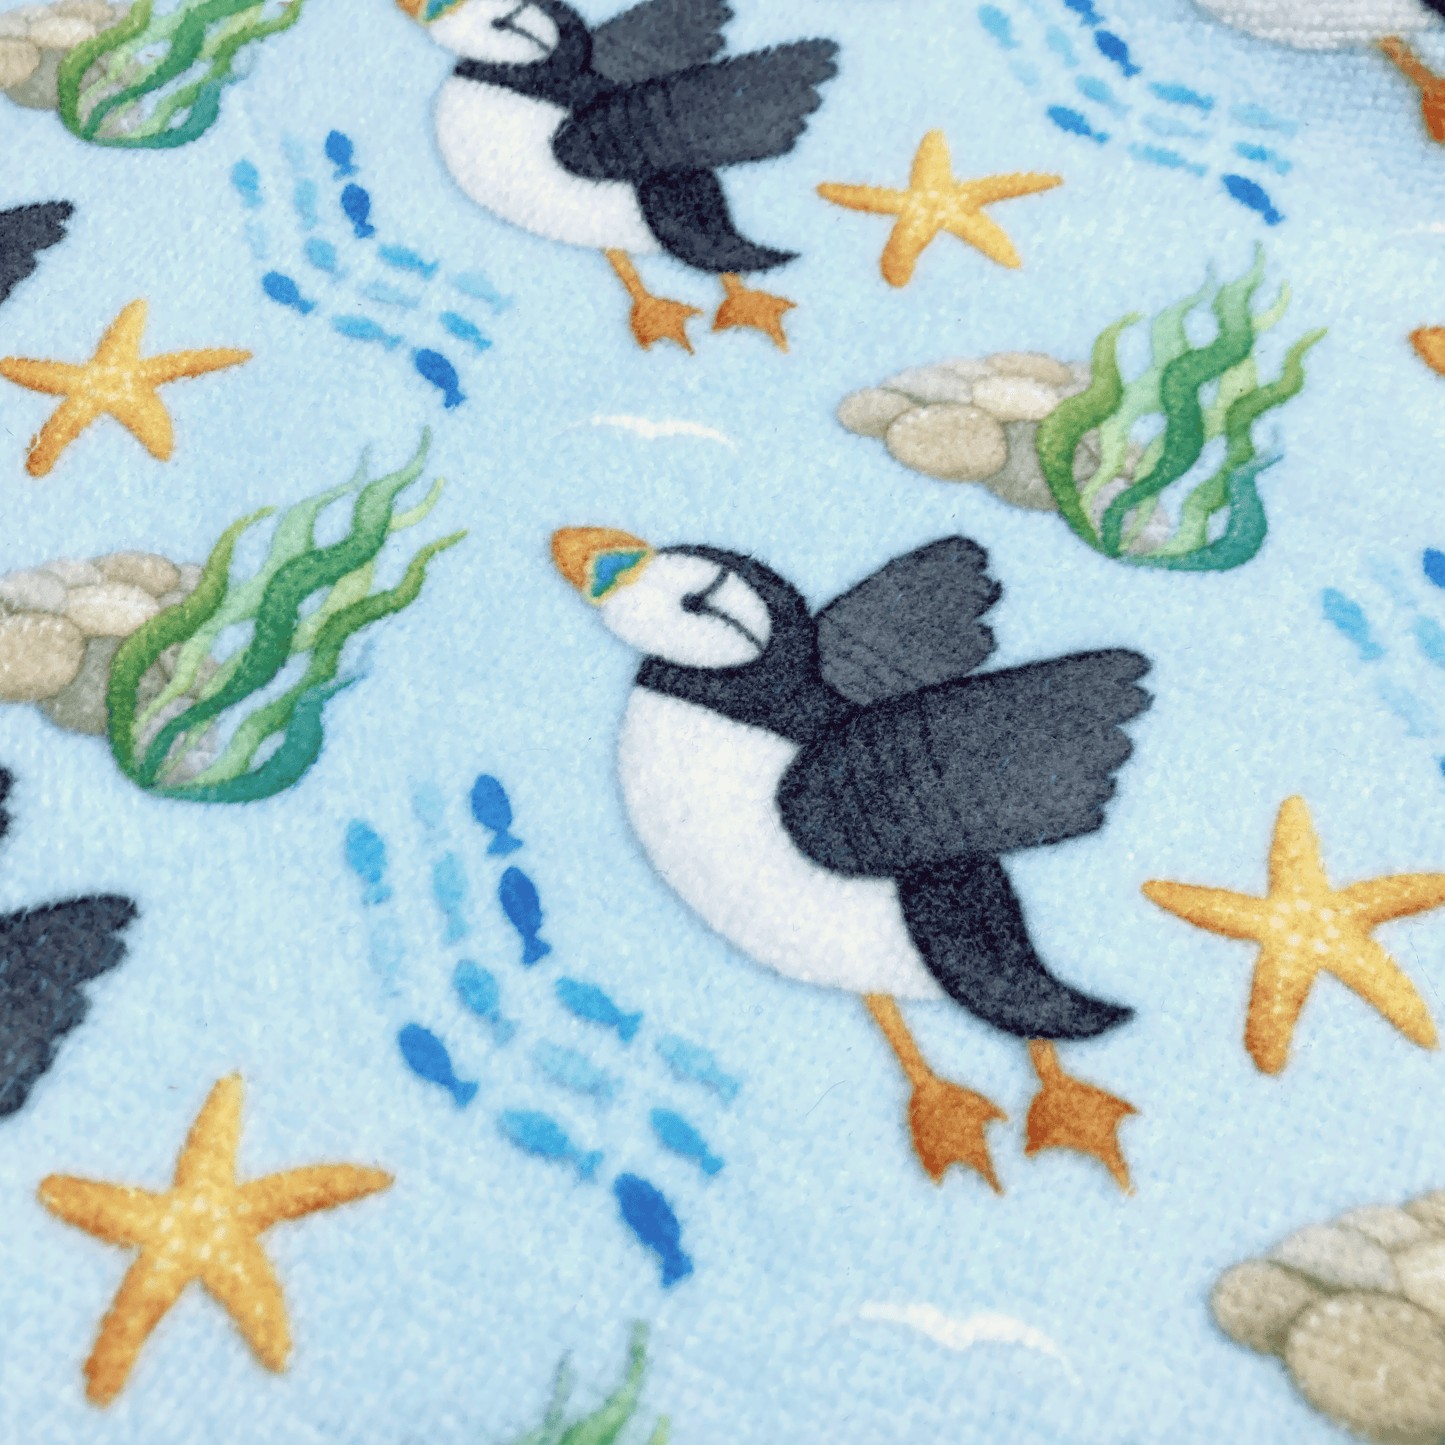 Tea Towel Bundle x2 - Seagull & Puffin Patterns - Fluffy Style Hand Towels - East Neuk Beach Crafts